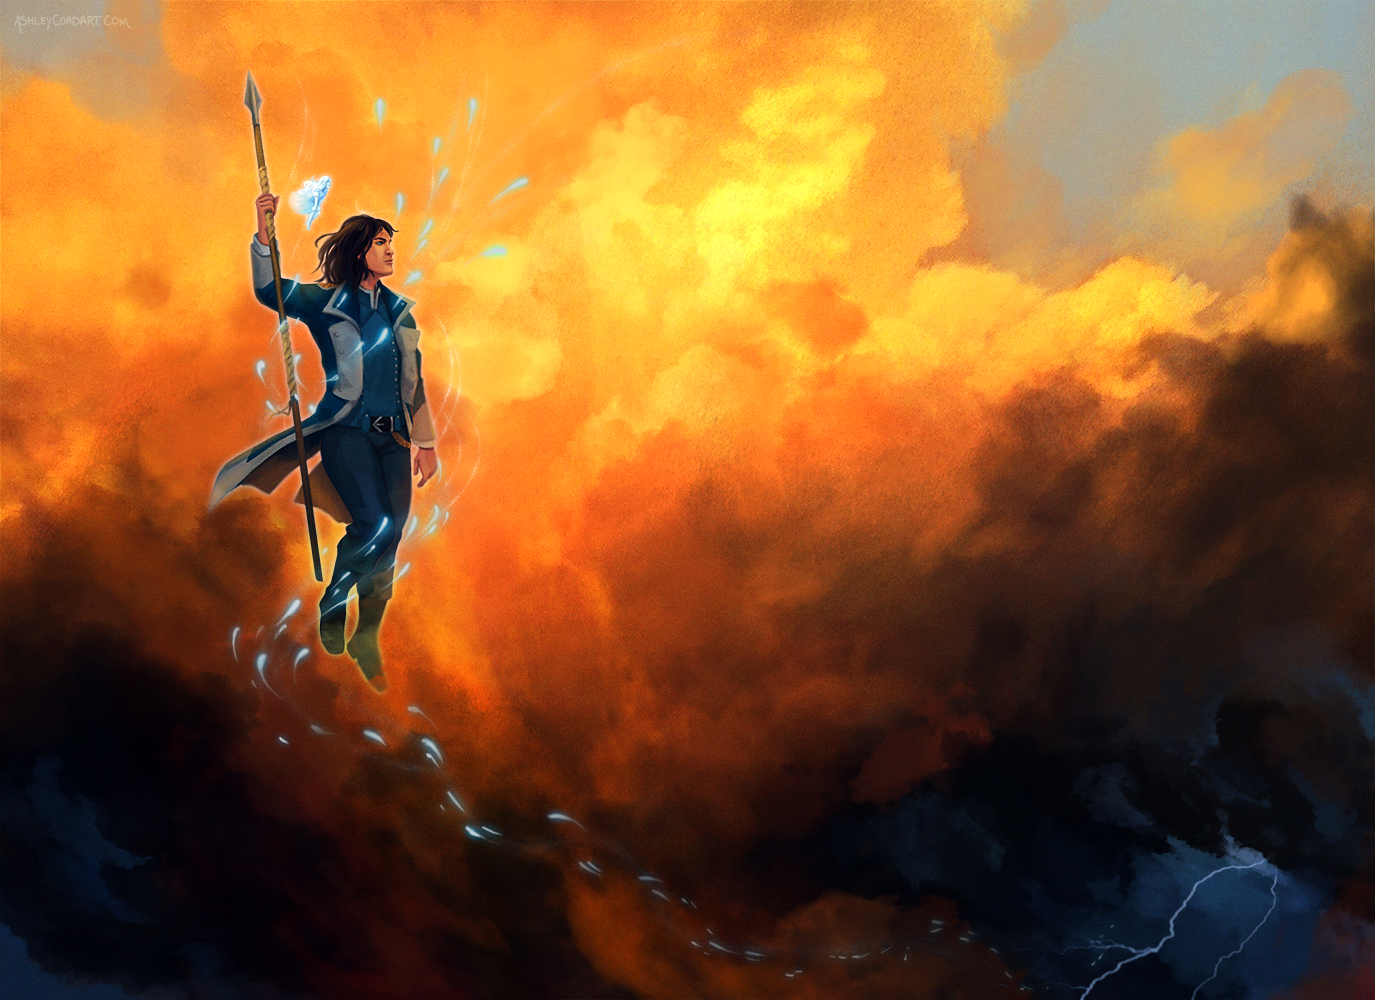 Above The Storm Stormlight Archive Art 17th Shard The Official Brandon Sanderson Fansite